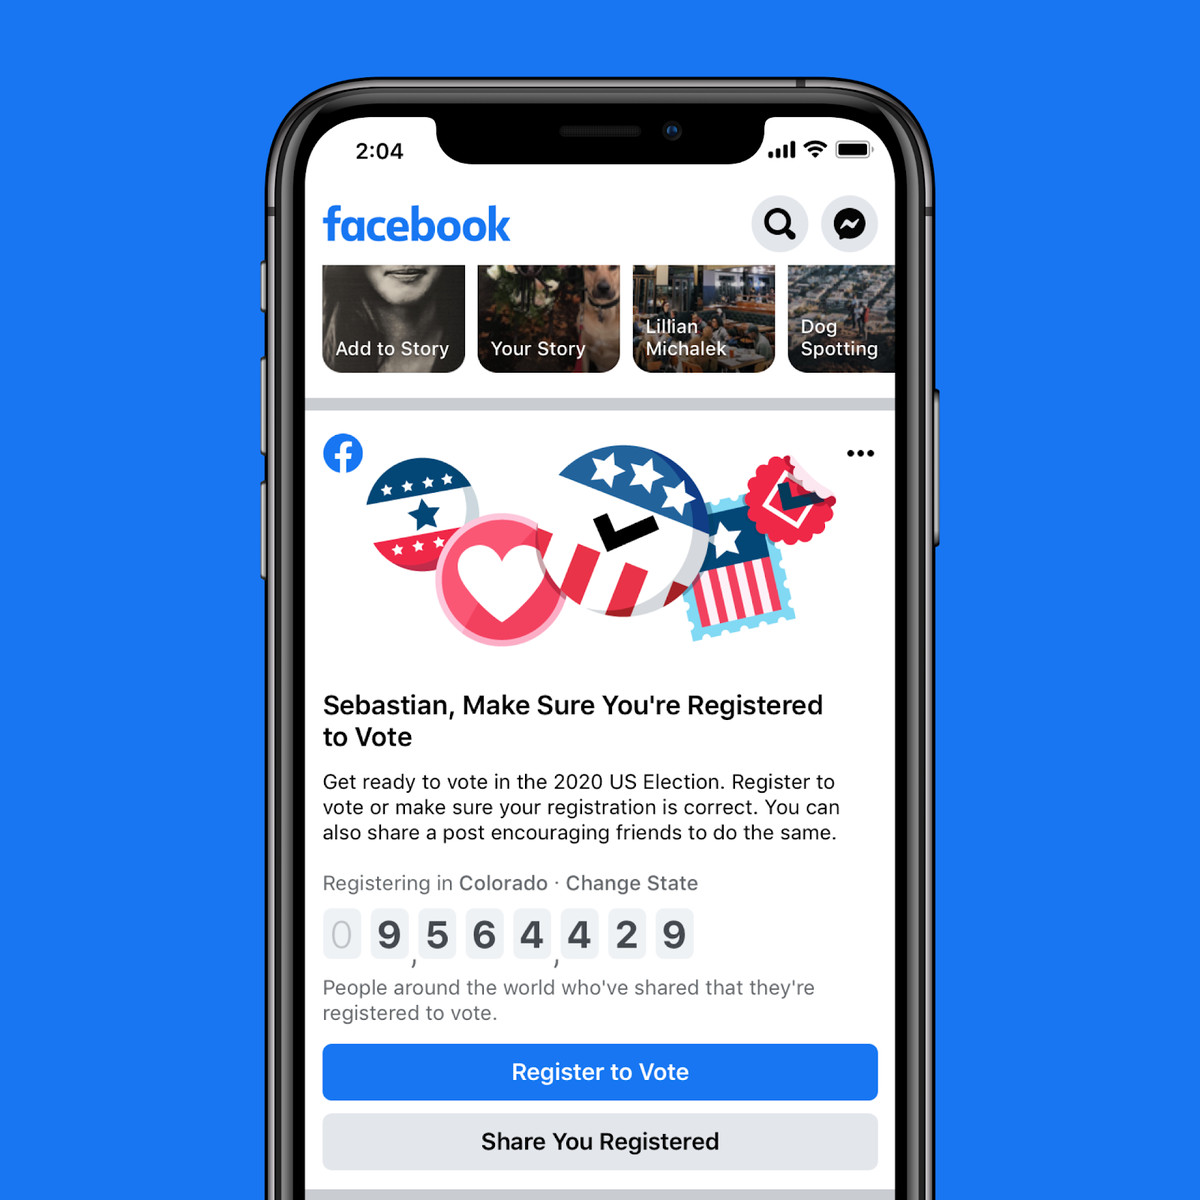 Facebook Will Pin Voting Registration Links To The Top Of The News Feed For All Us Voters Wilson S Media - roblox city thailand posts facebook